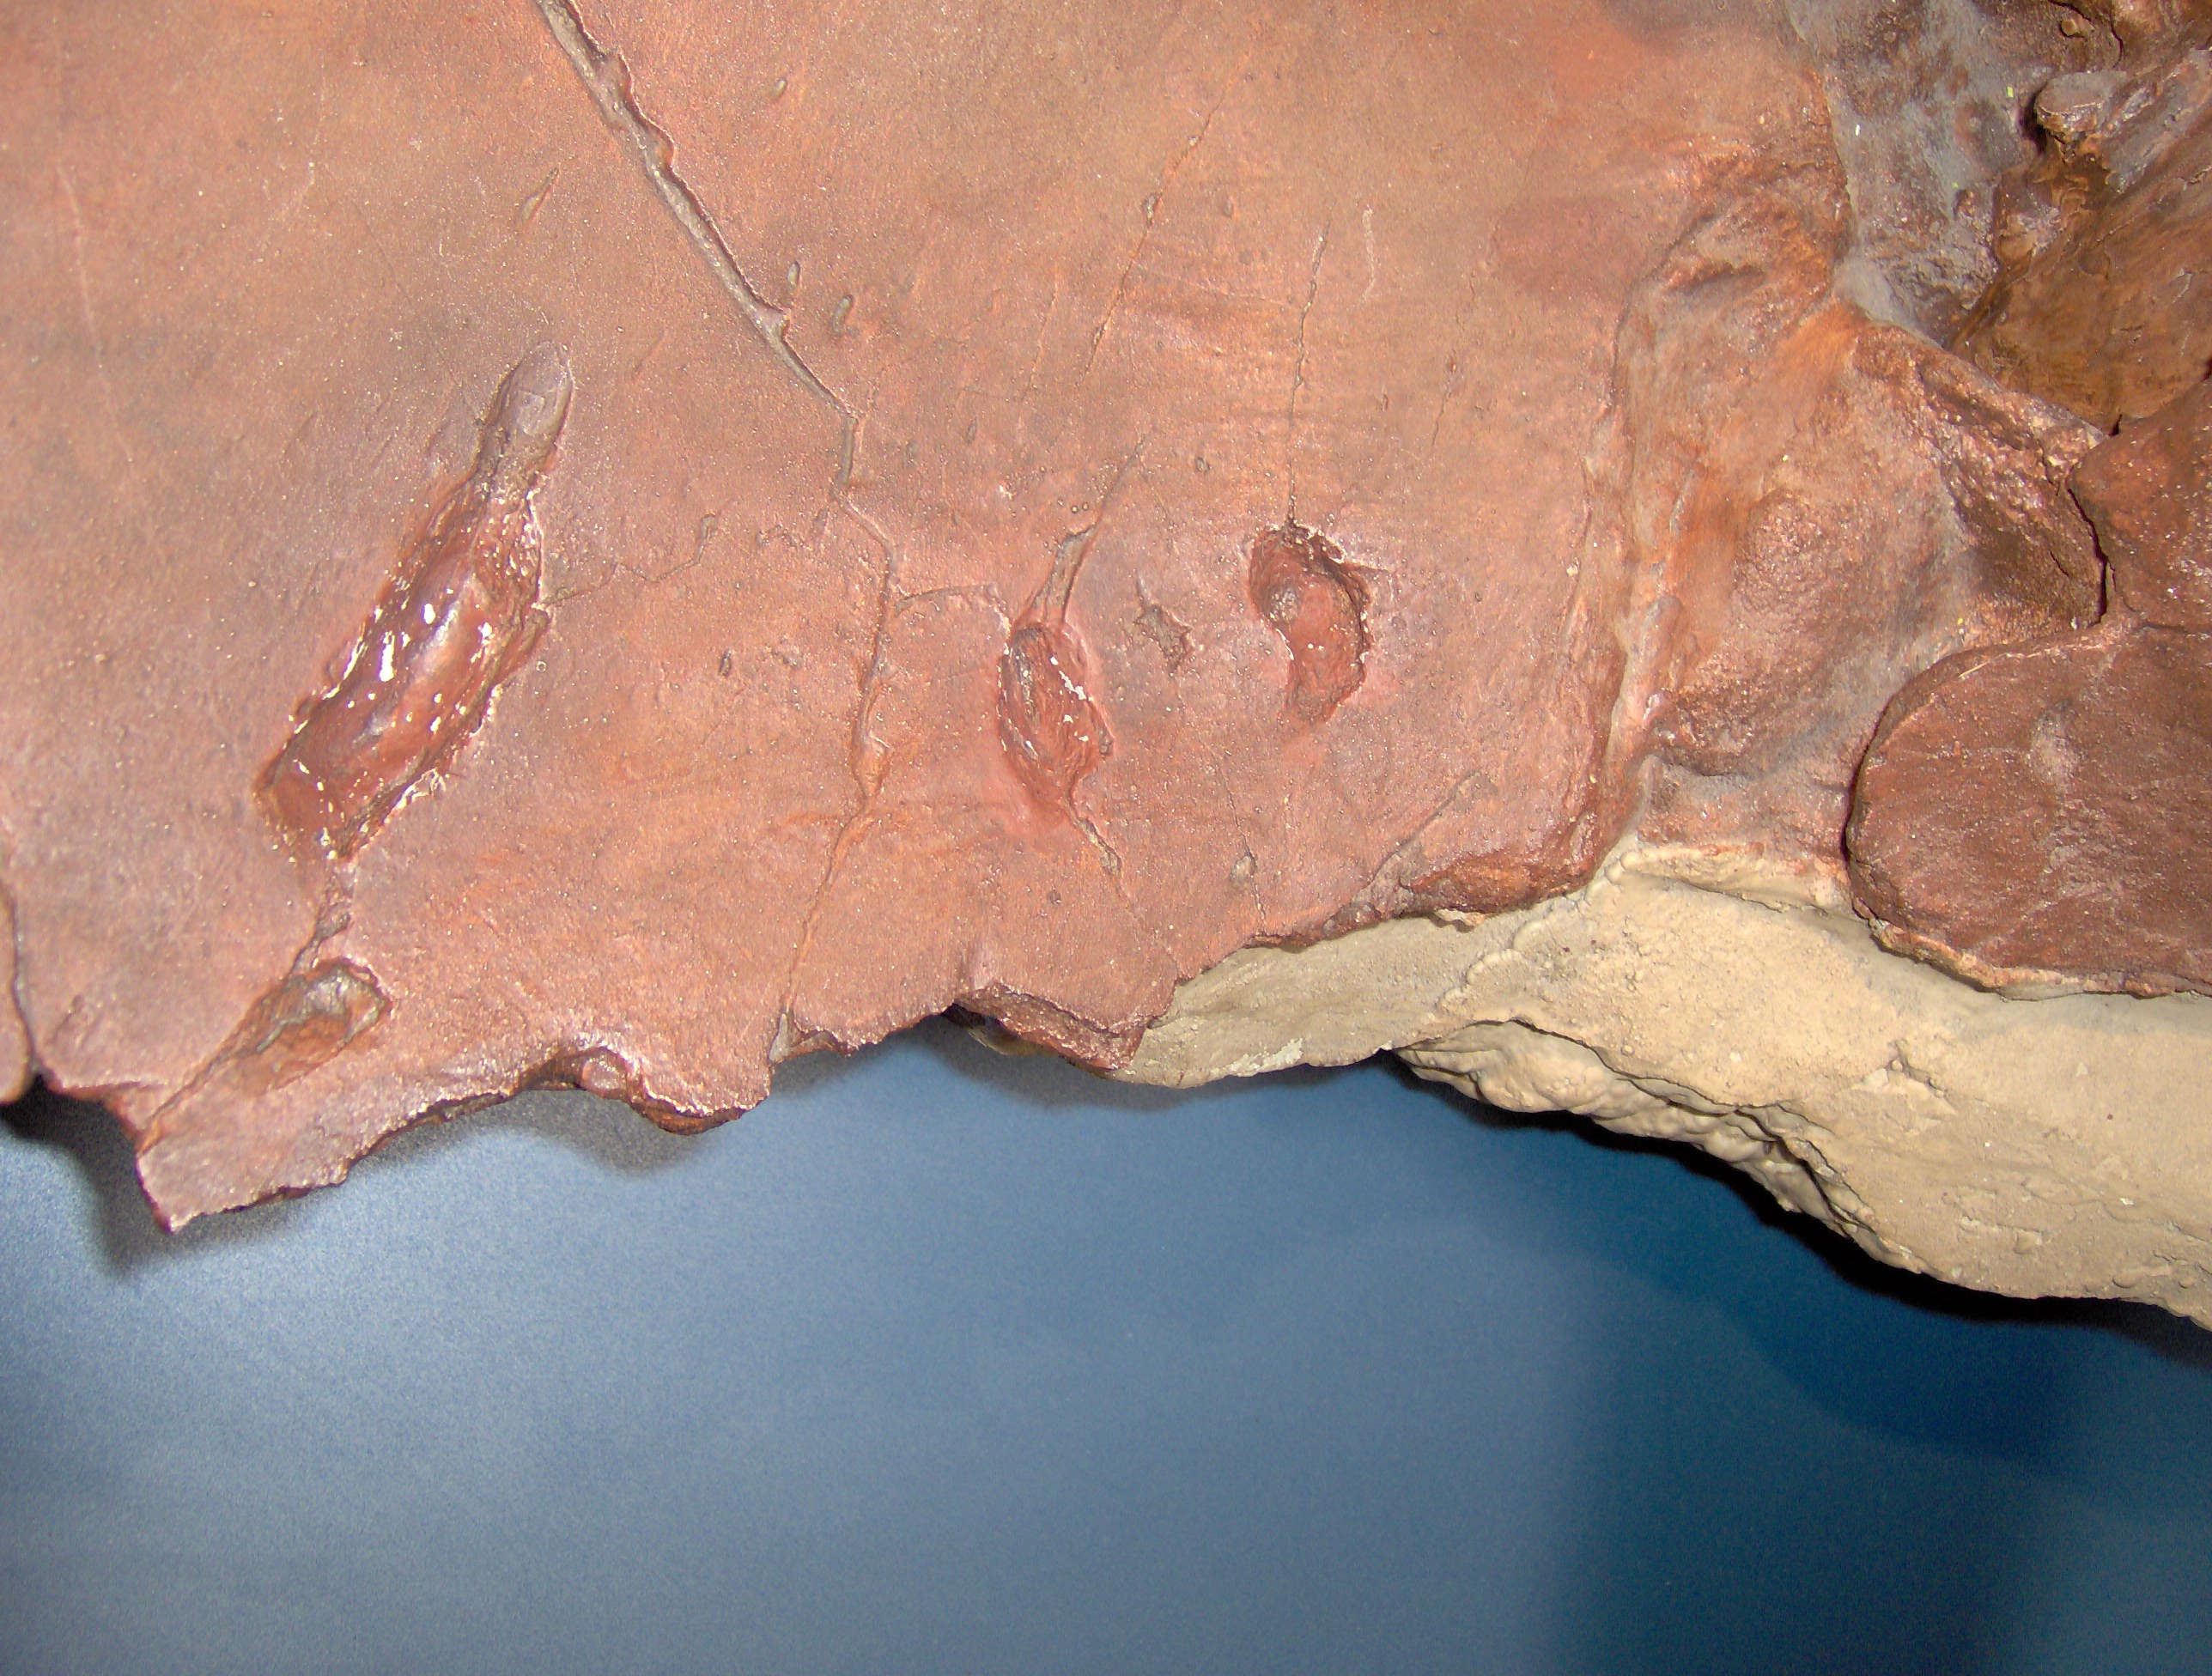 close up a section of a Triceratops frill with several puncture marks near the edge due to teeth from a predator.